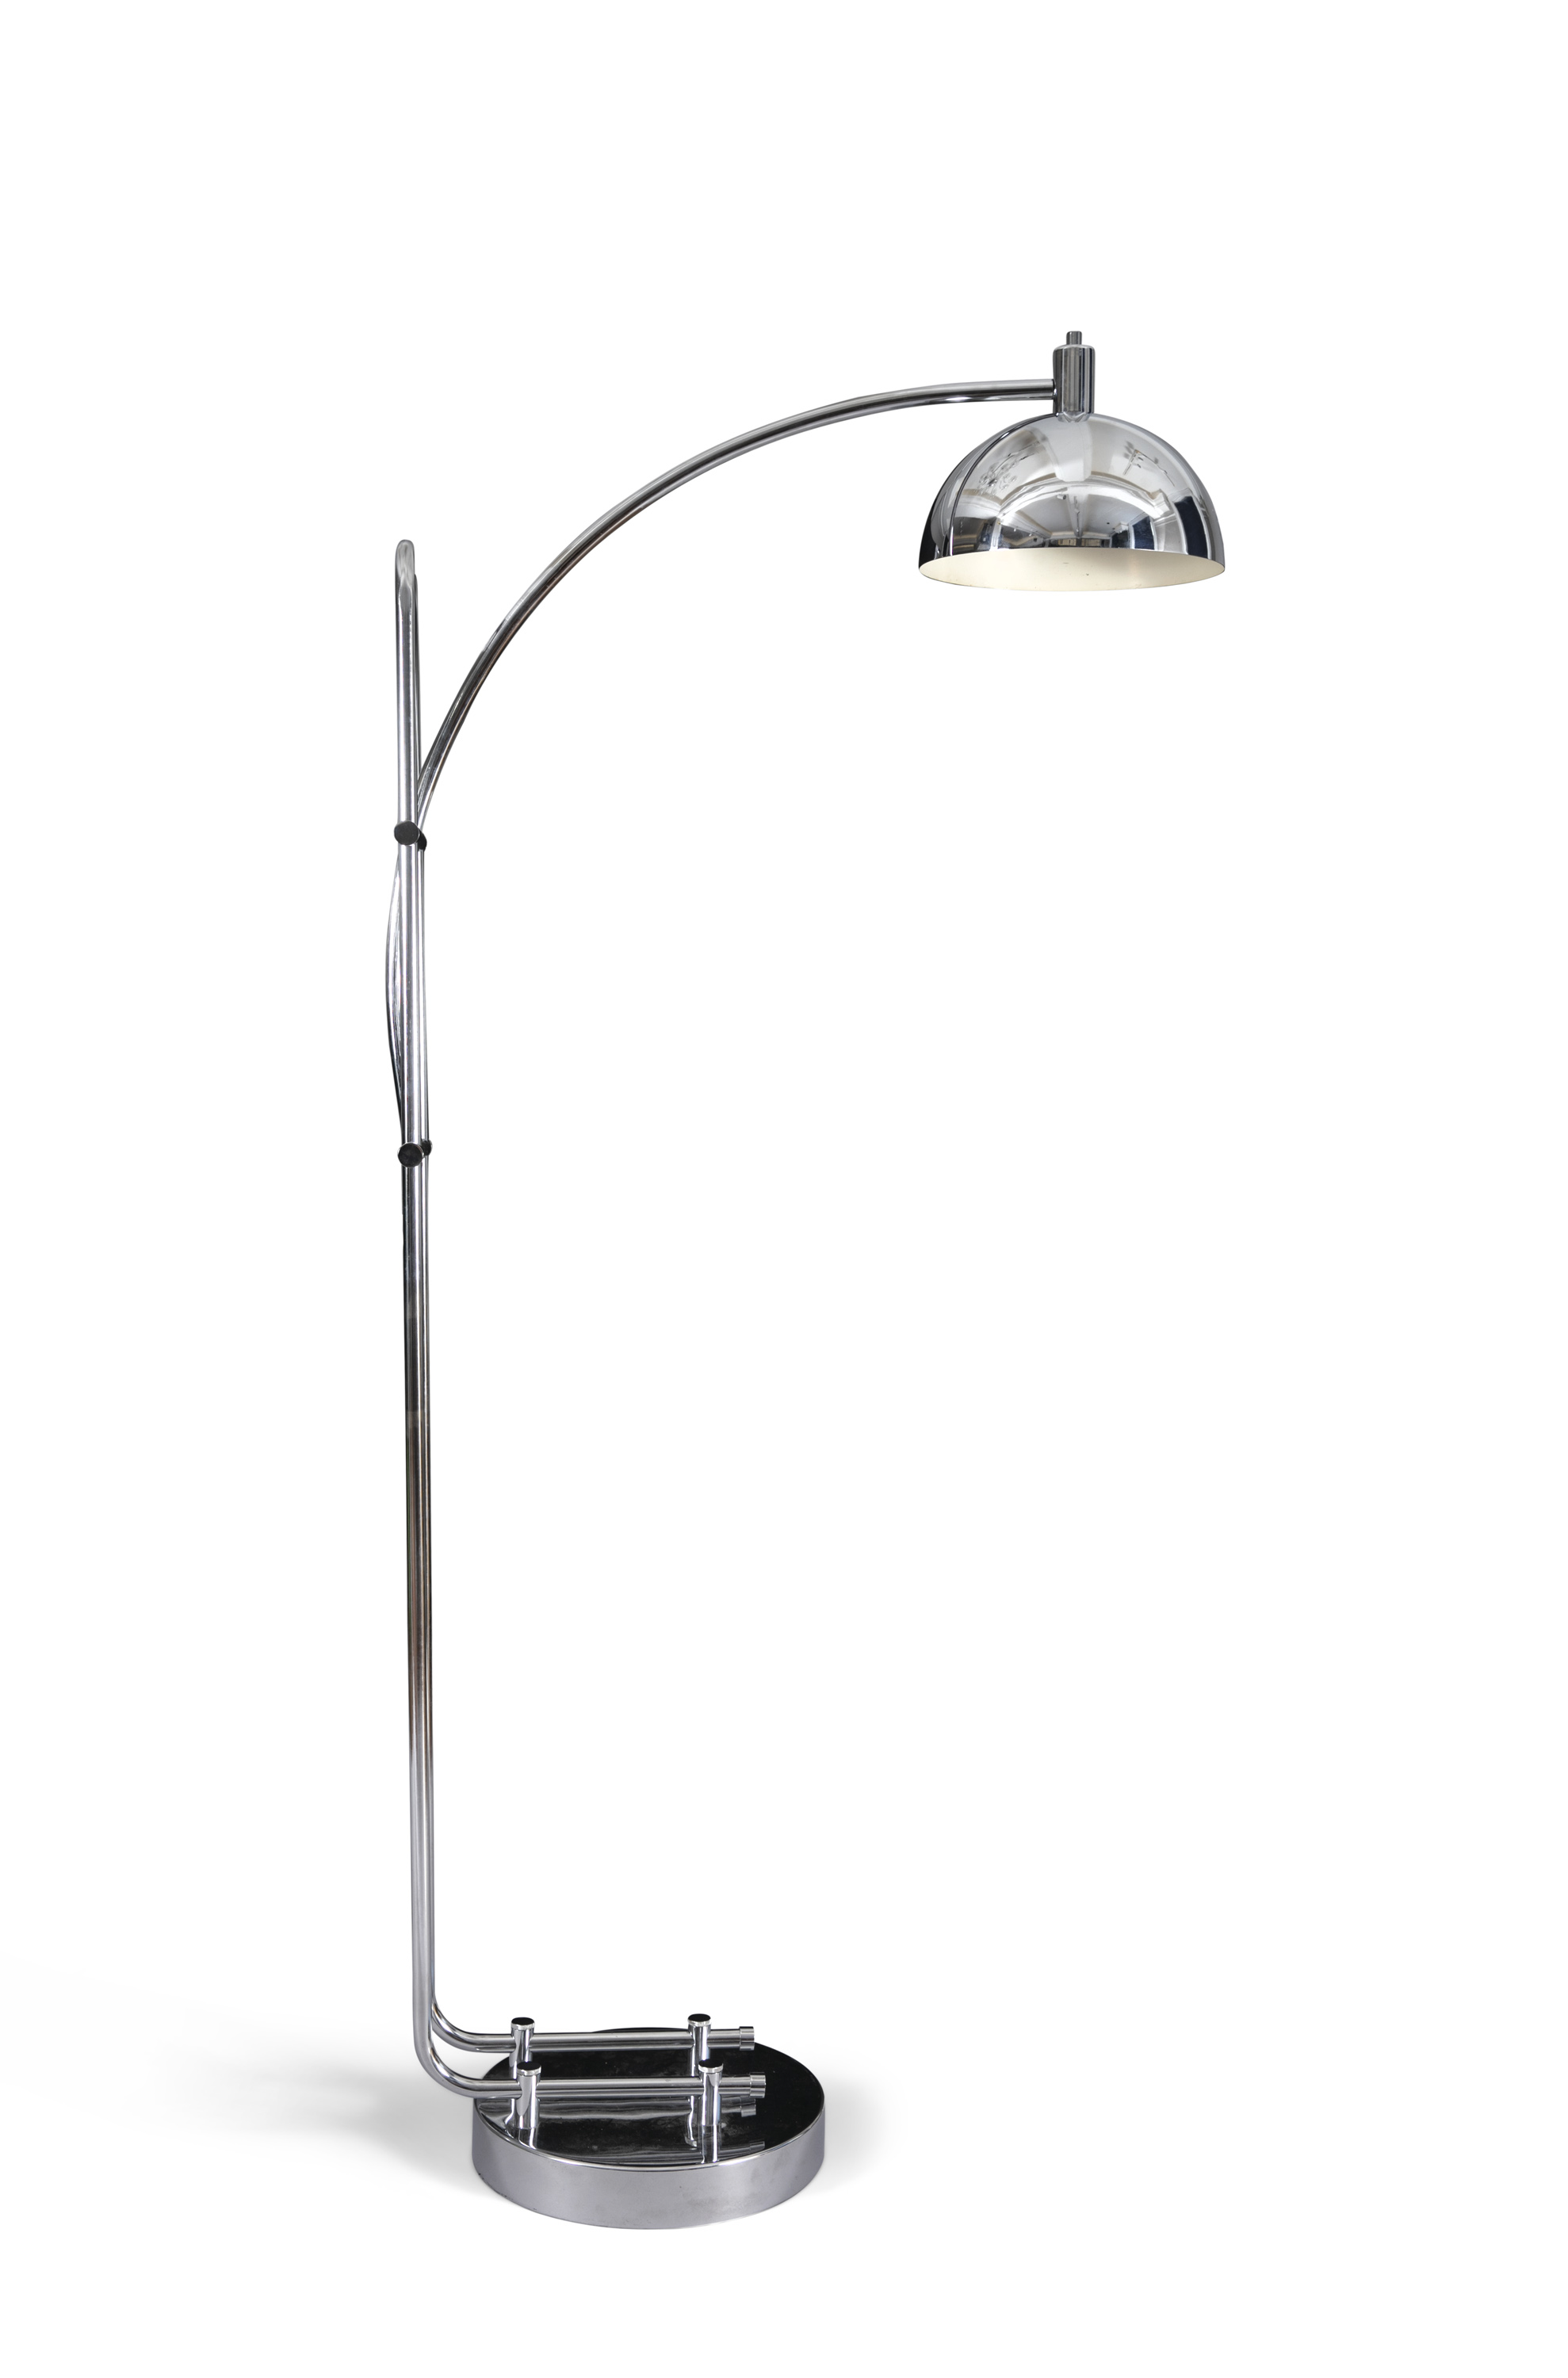 T-PONS A chrome T-Pons Arco floor lamp with adjustable tubular structure. c. 1970. 200 cm (high)